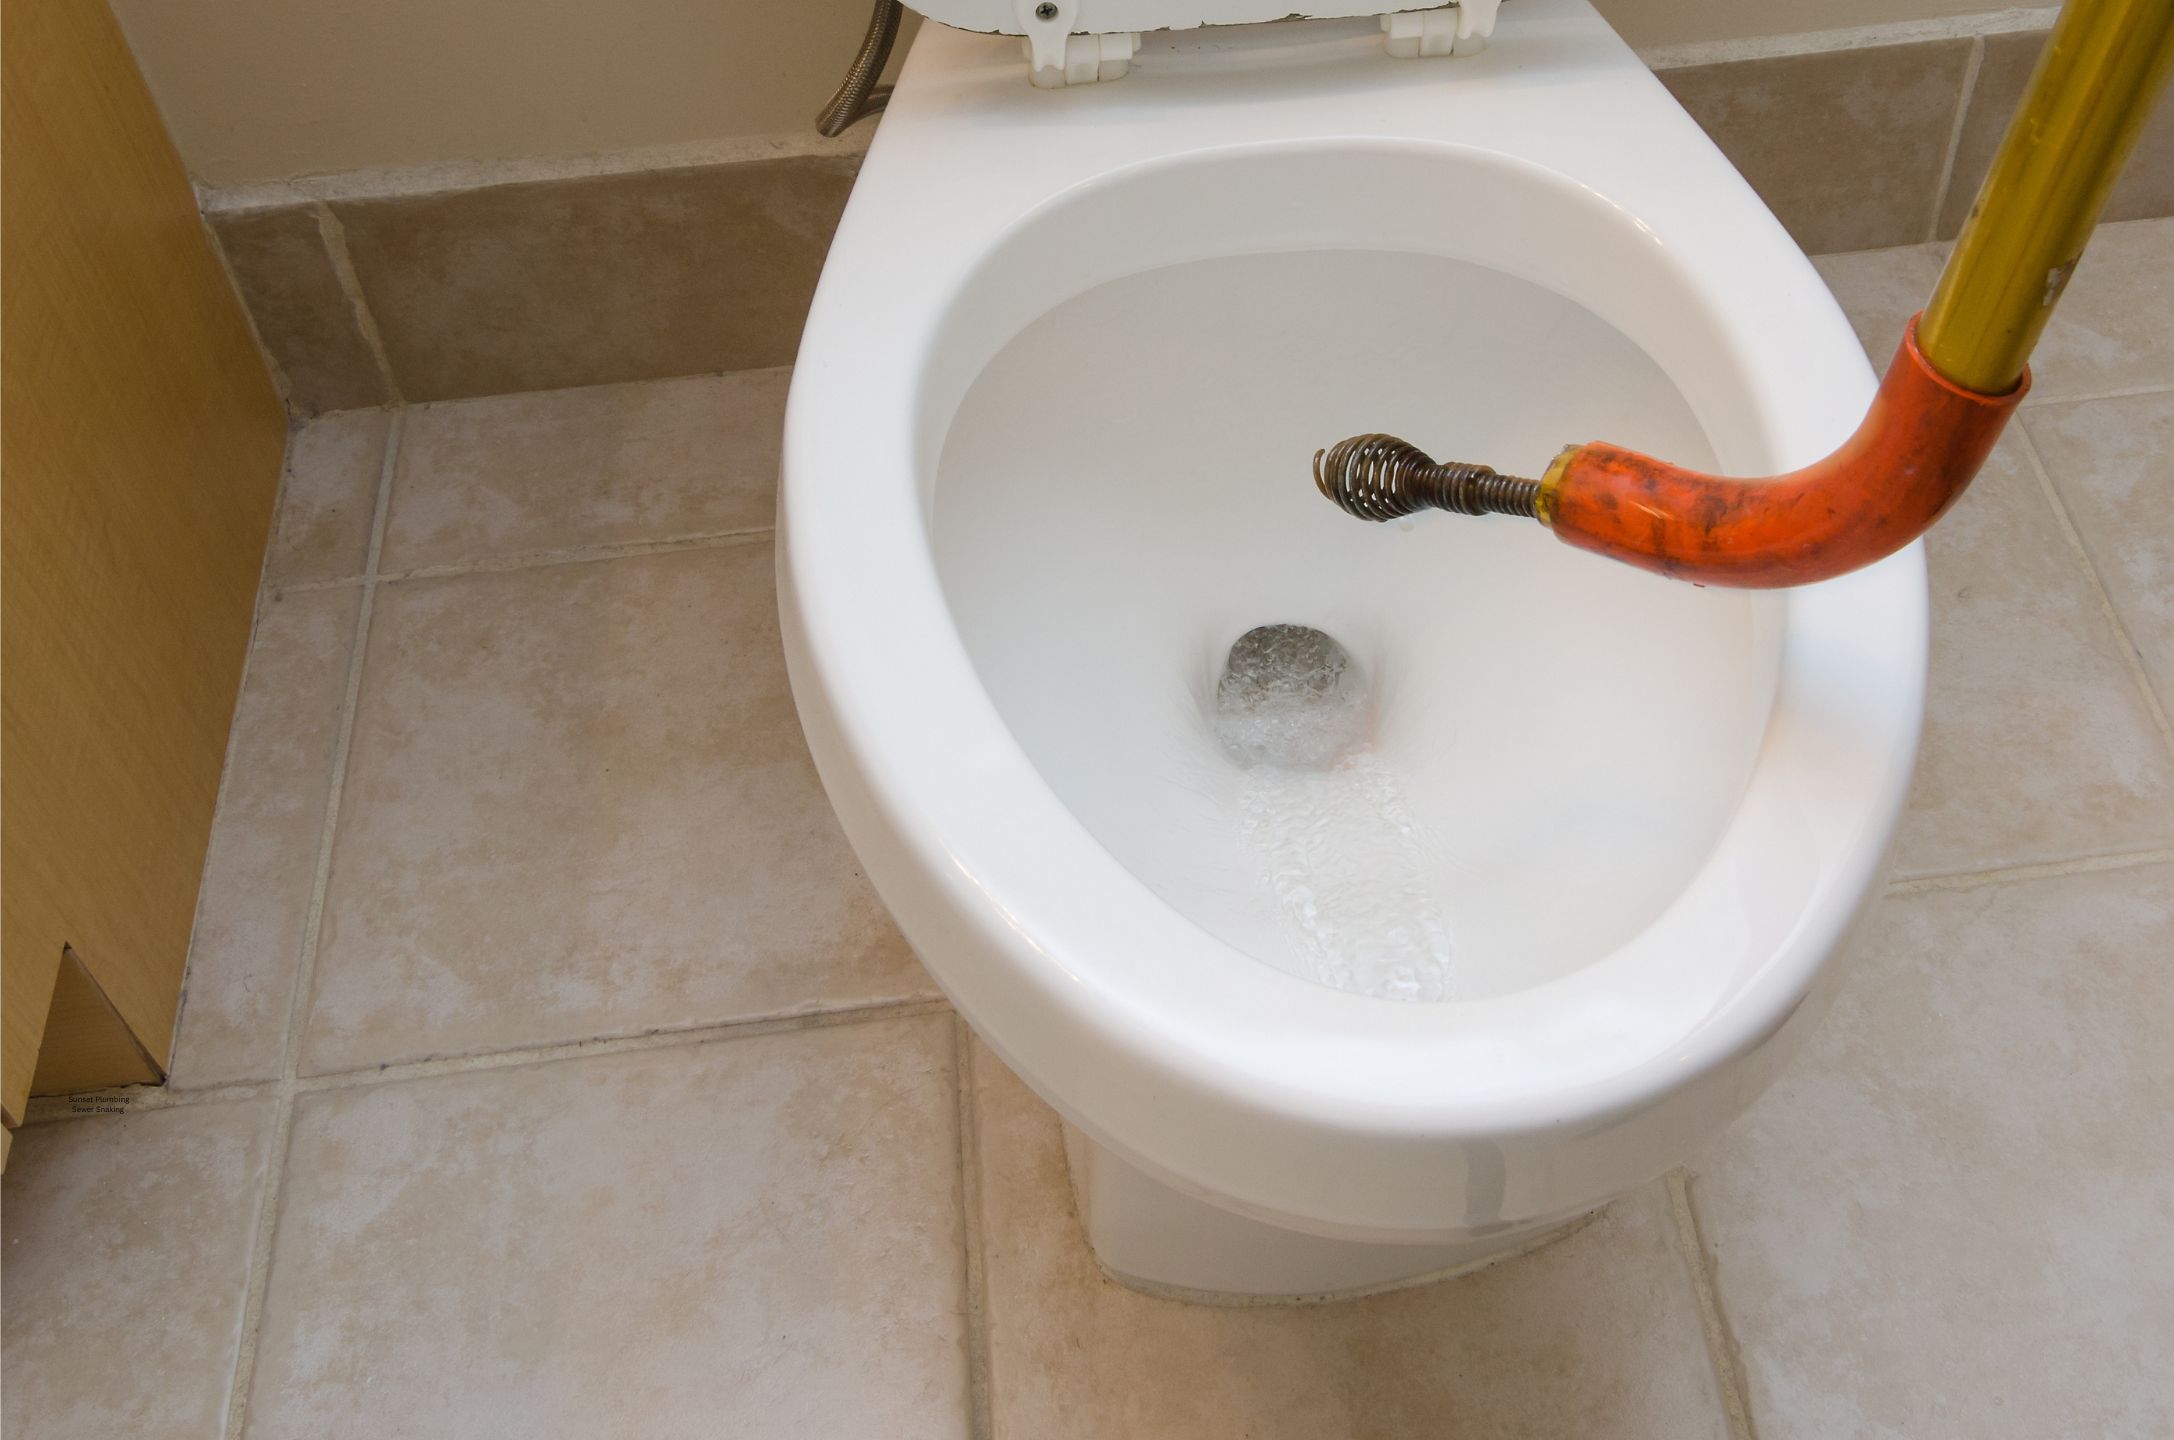 Is your sewer still clogged after snaking it?